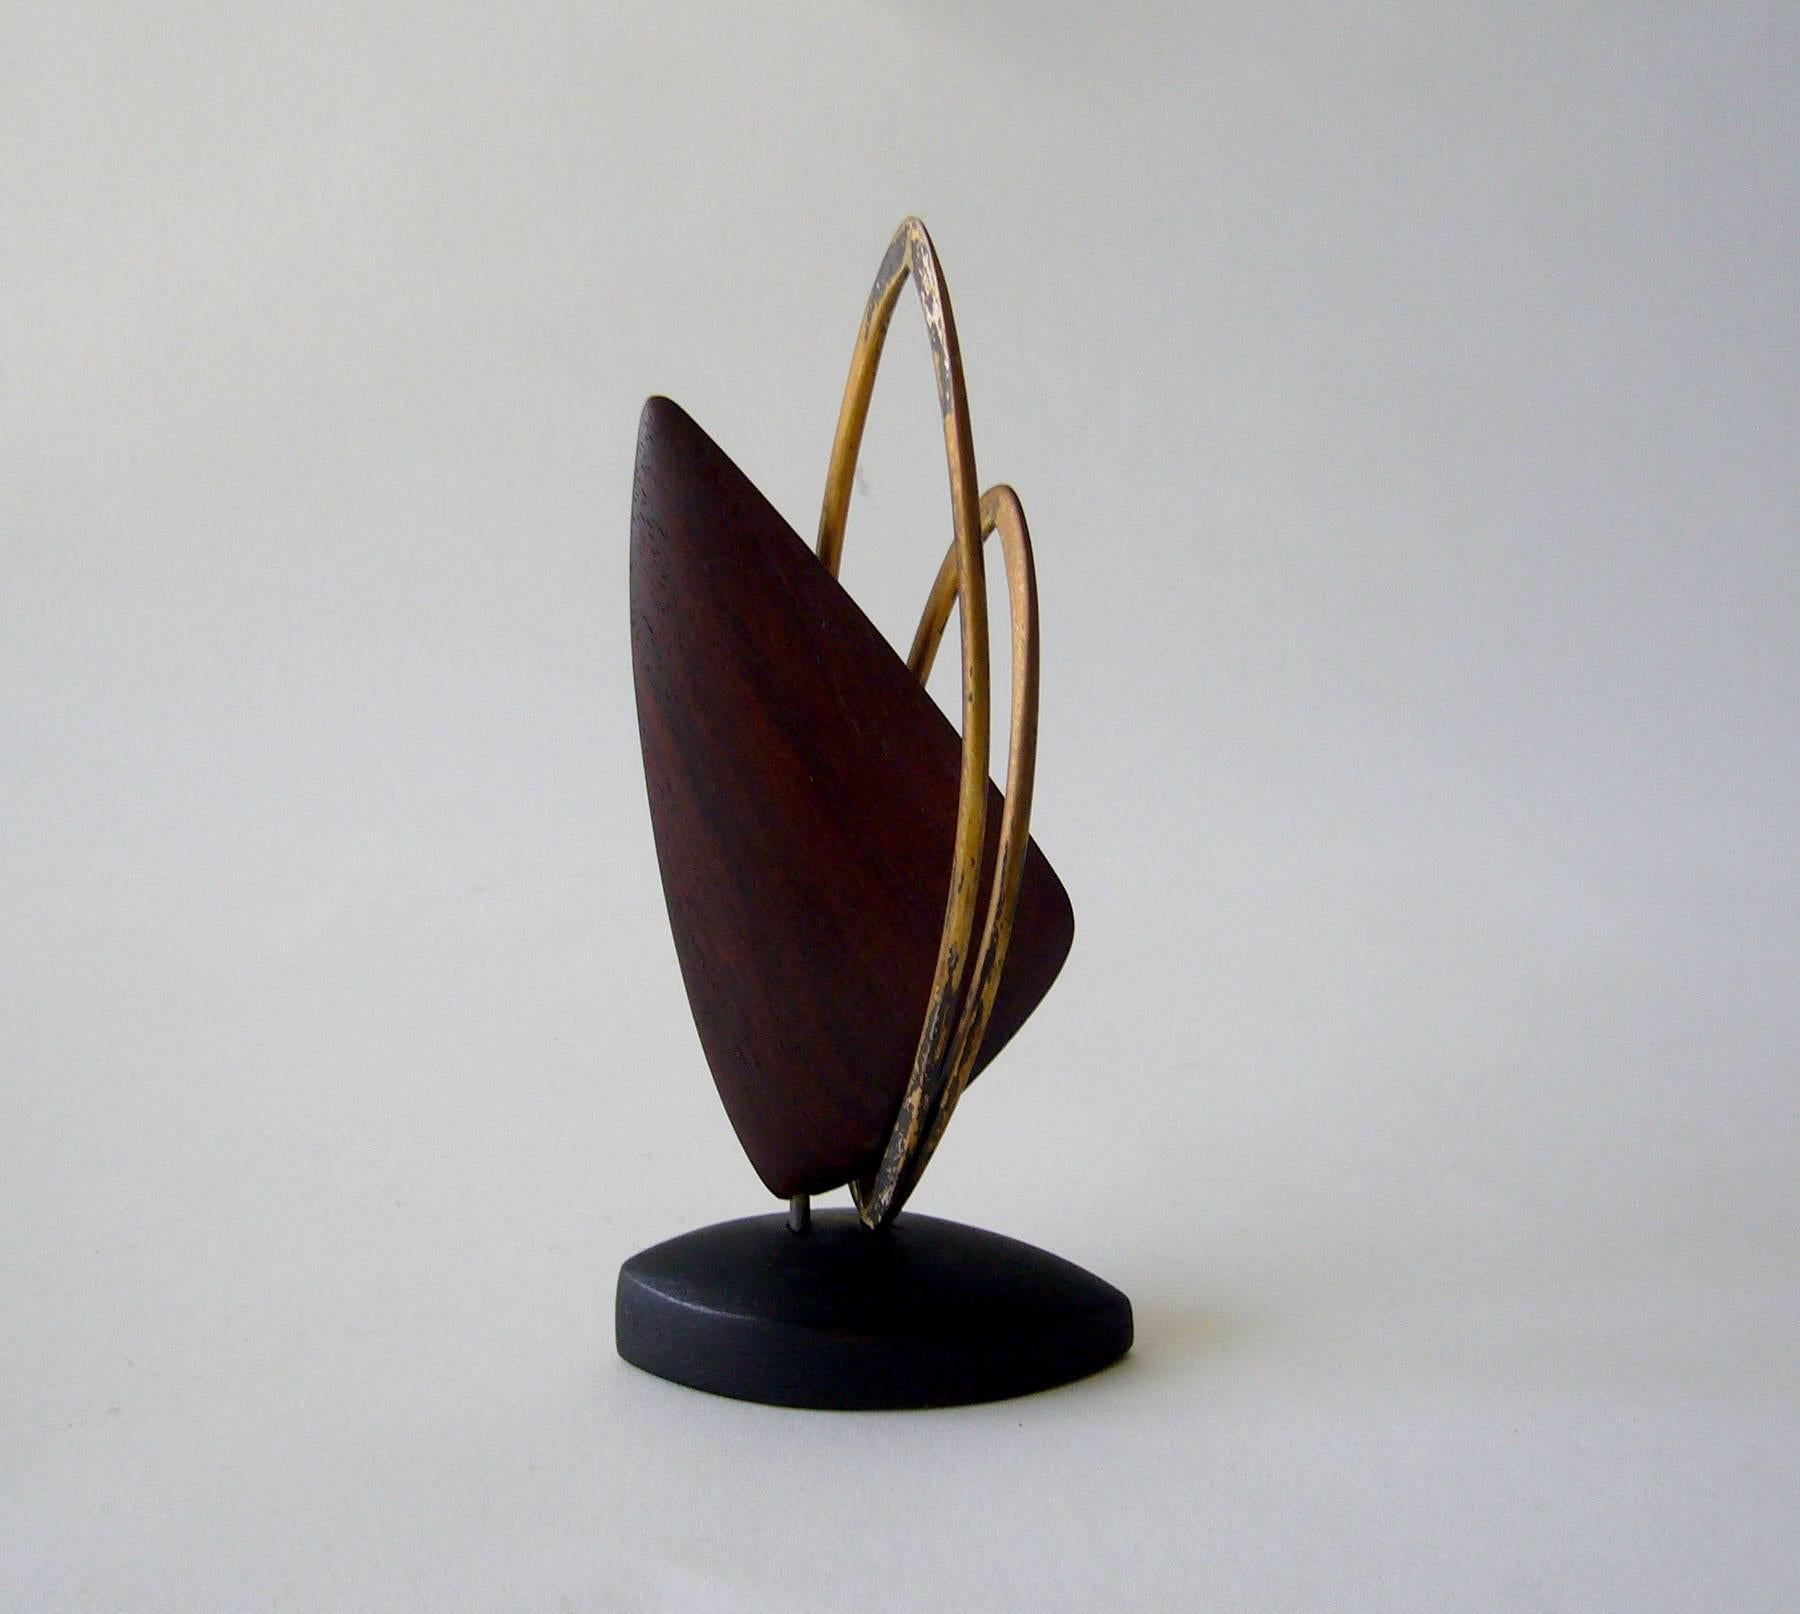 Handmade copper sculpture on wood base created by Jack Nutting of San Francisco, California. Sculpture stands 5.75